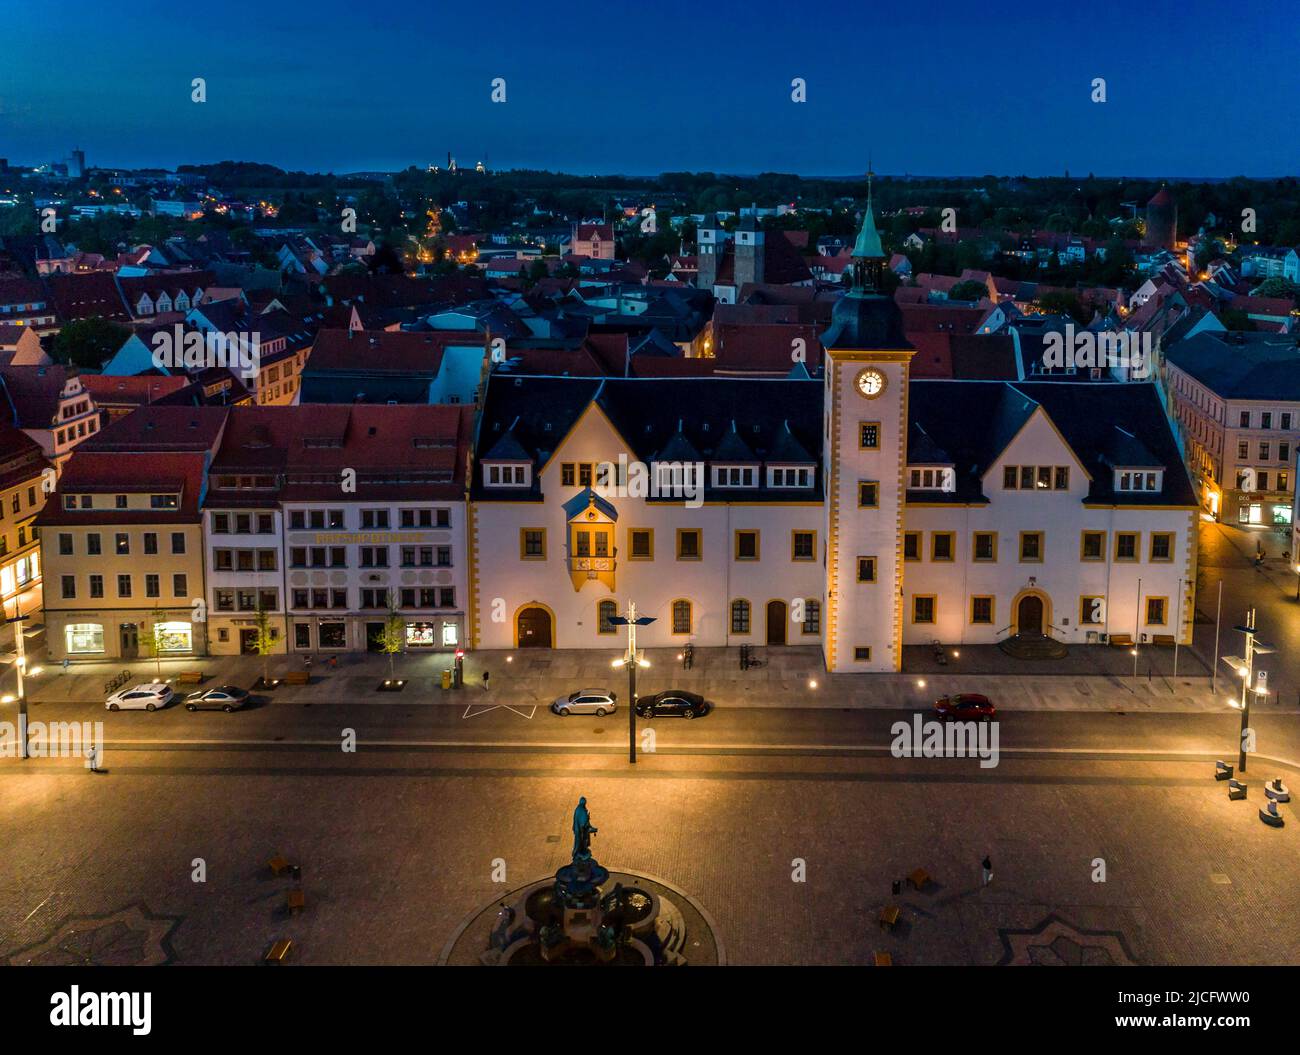 Obermarkt in Freiberg: View of the town hall on the Obermarkt in Freiberg. The more than 800 year old mining town of Freiberg once gained wealth and importance through the Saxon silver mining. In the middle of the market square is the monument to Otto the Reic Stock Photo